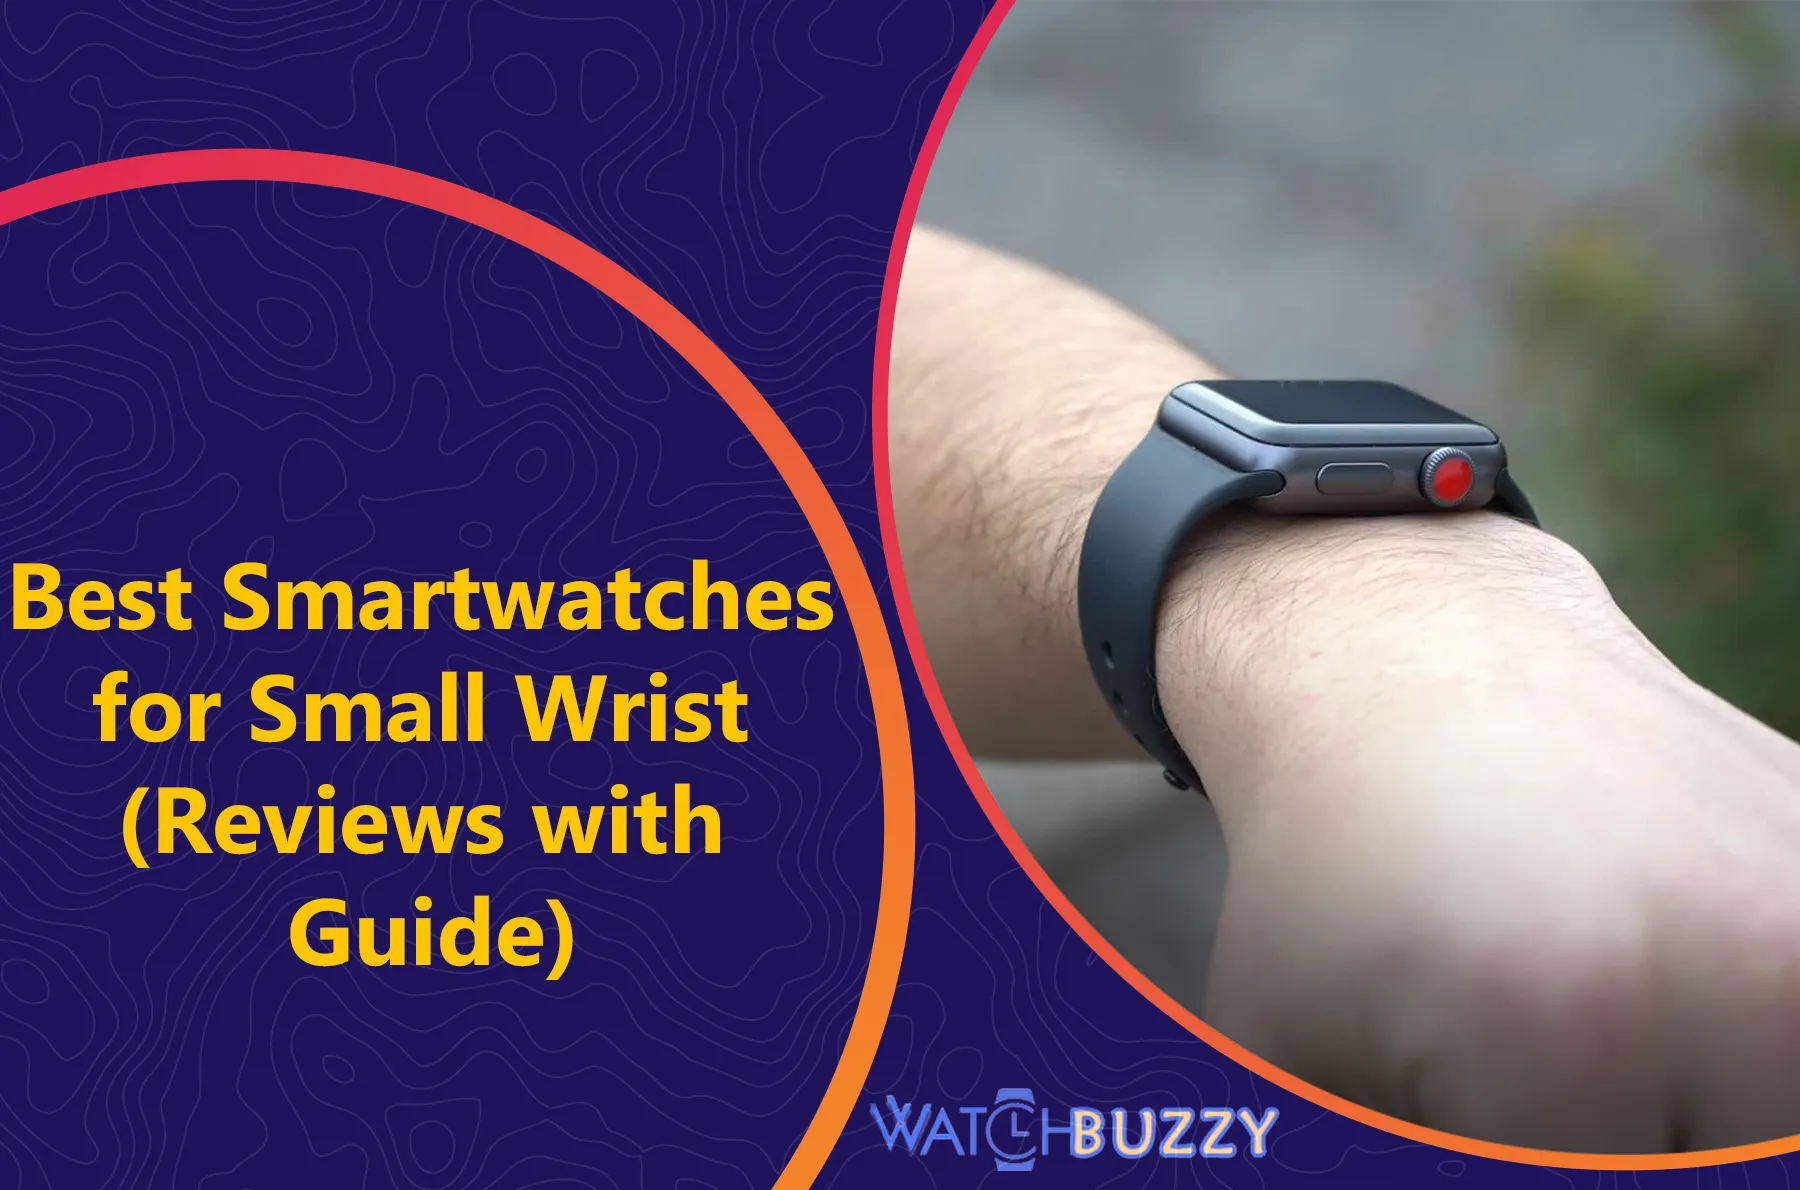 Best Smartwatches for Small Wrist (Reviews with Guide)